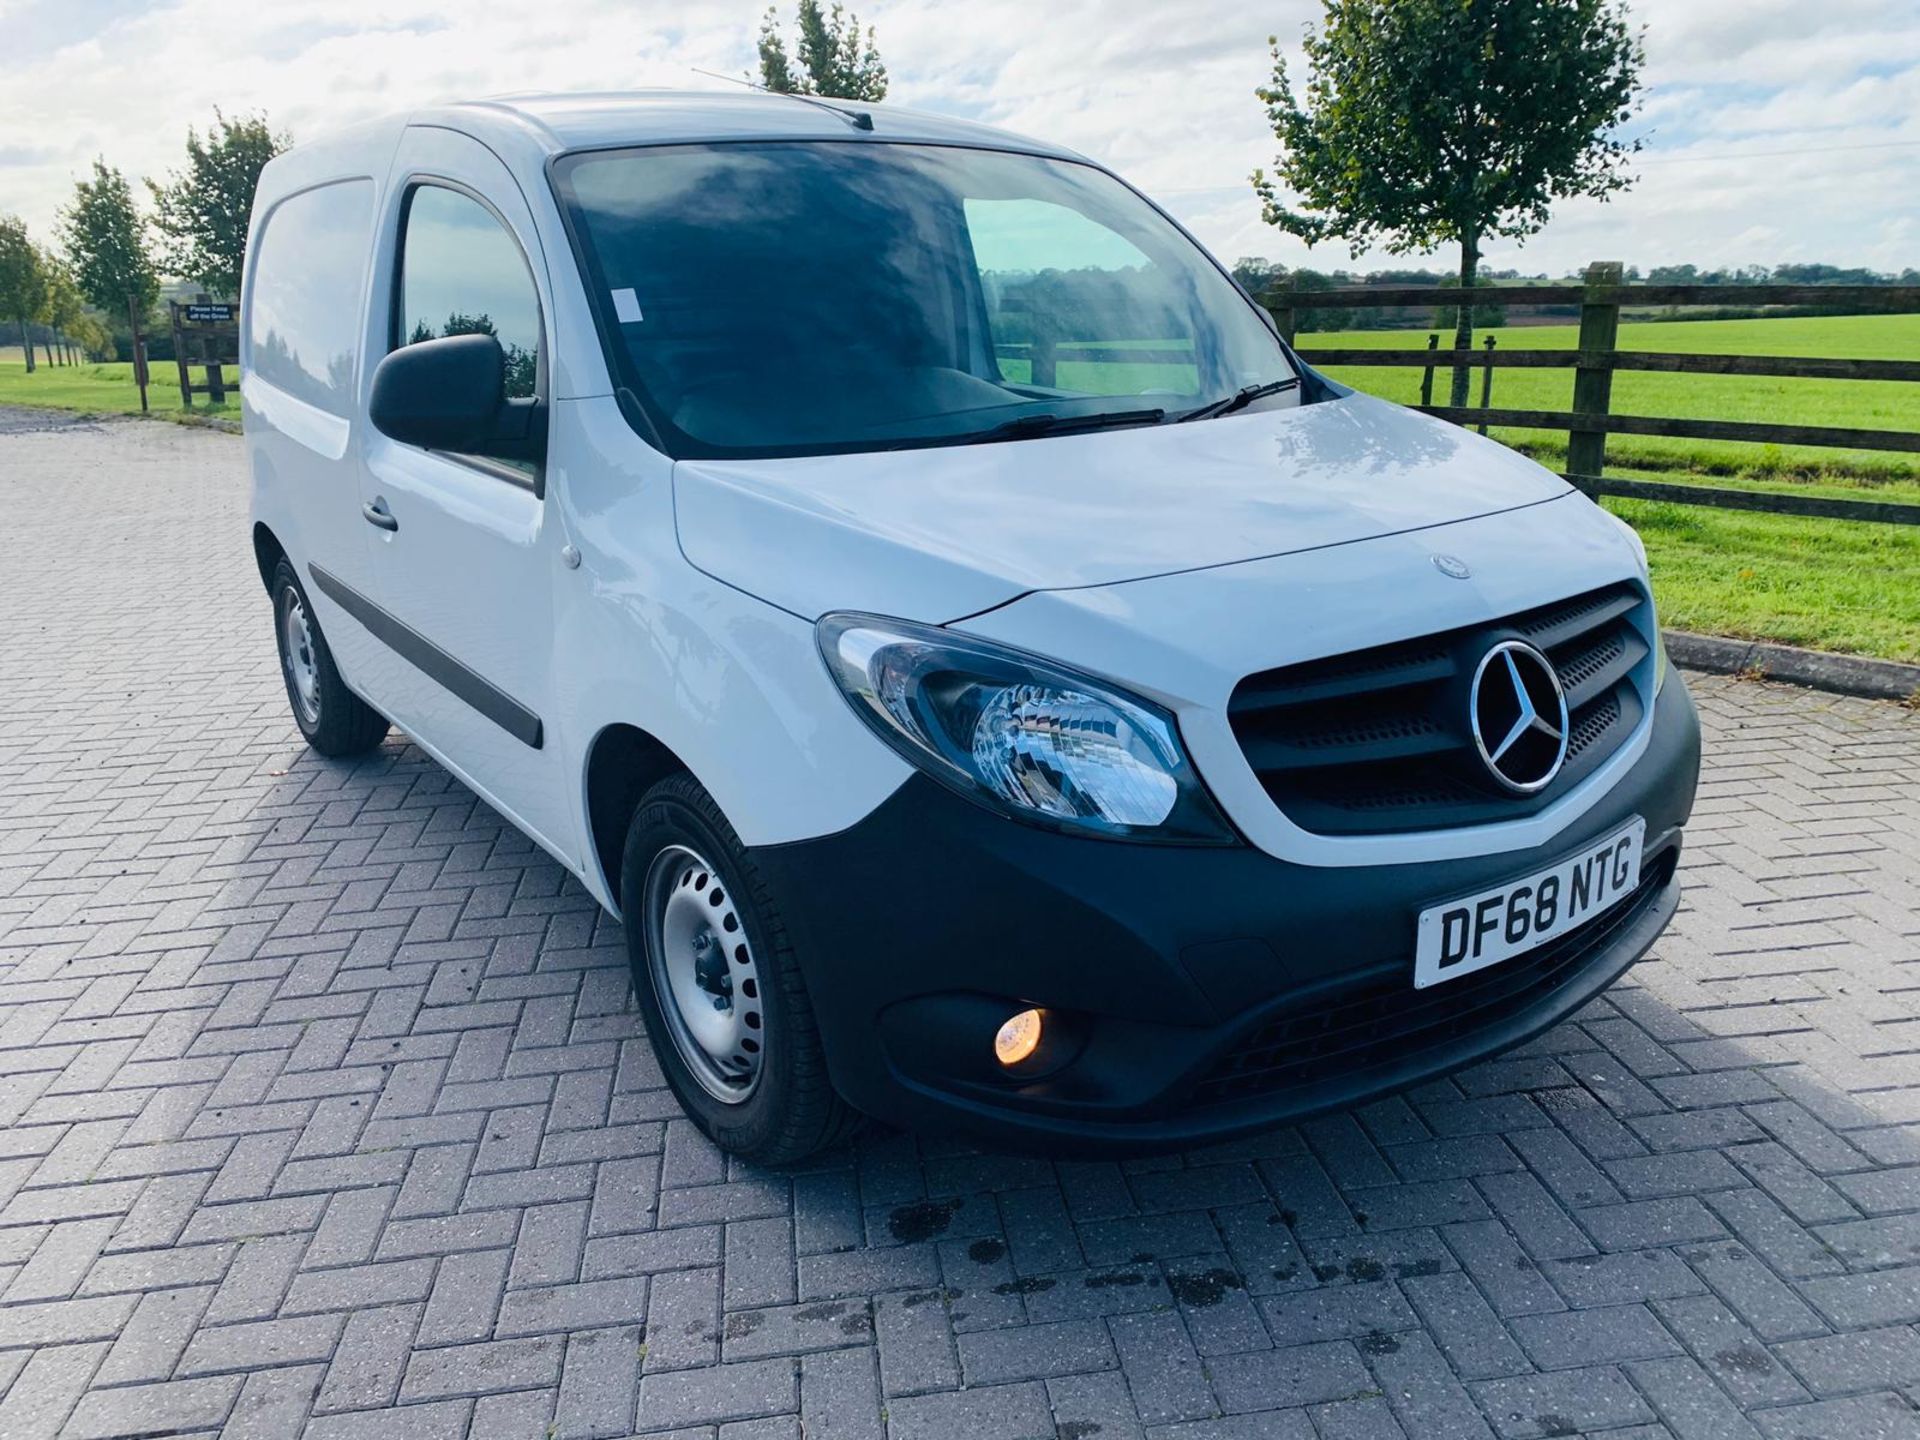 (RESERVE MET) Mercedes Citan 1.5 109 CDI LWB - 2019 Model - 1 Owner From New - ONLY 1K MILES WOW - - Image 3 of 26